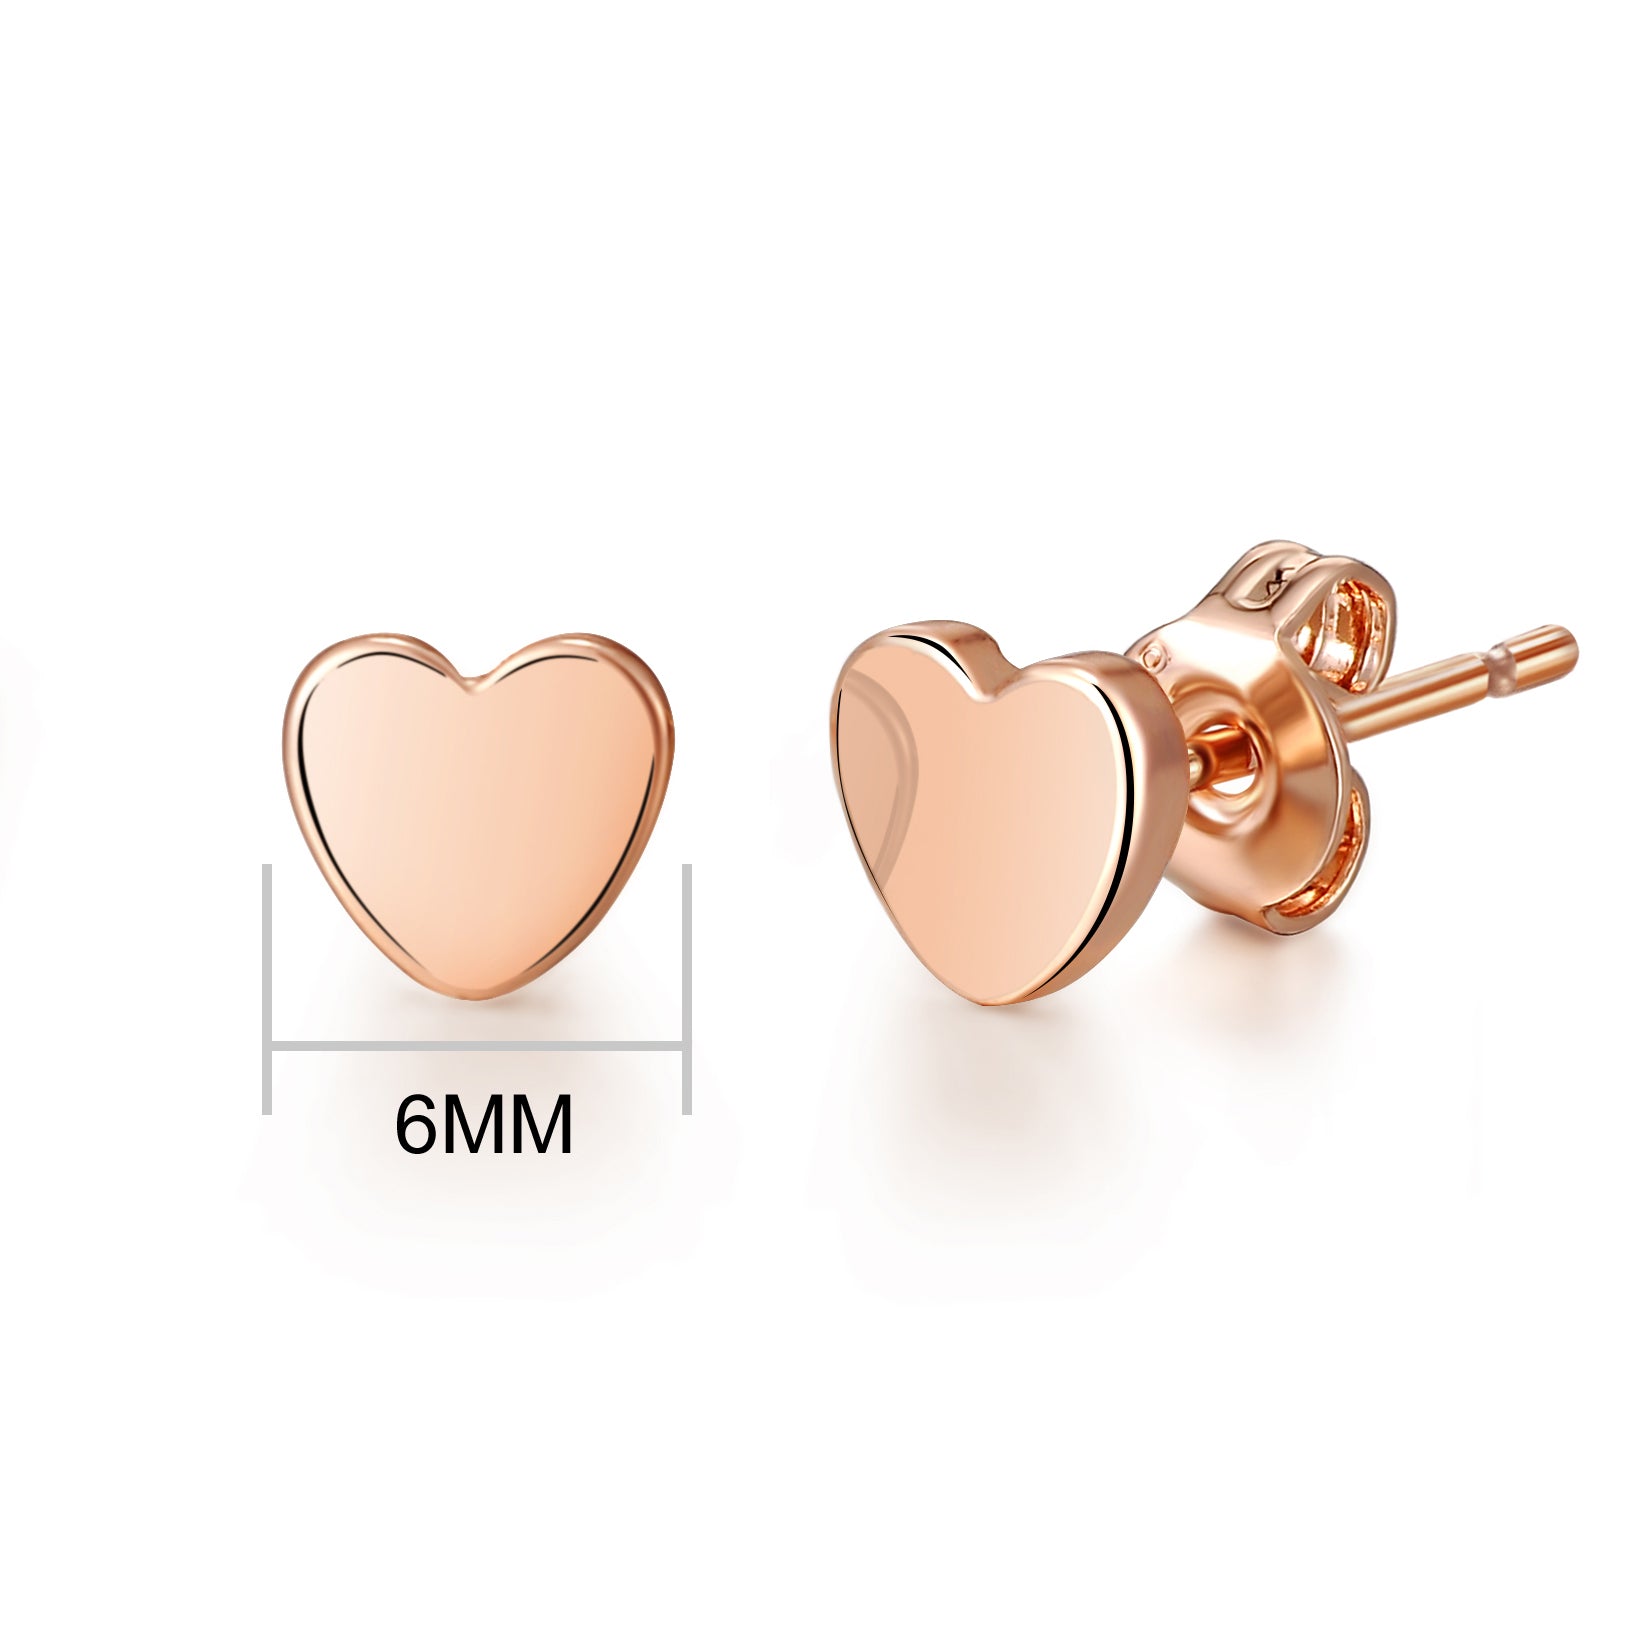 5 Pairs of Rose Gold Plated Earrings